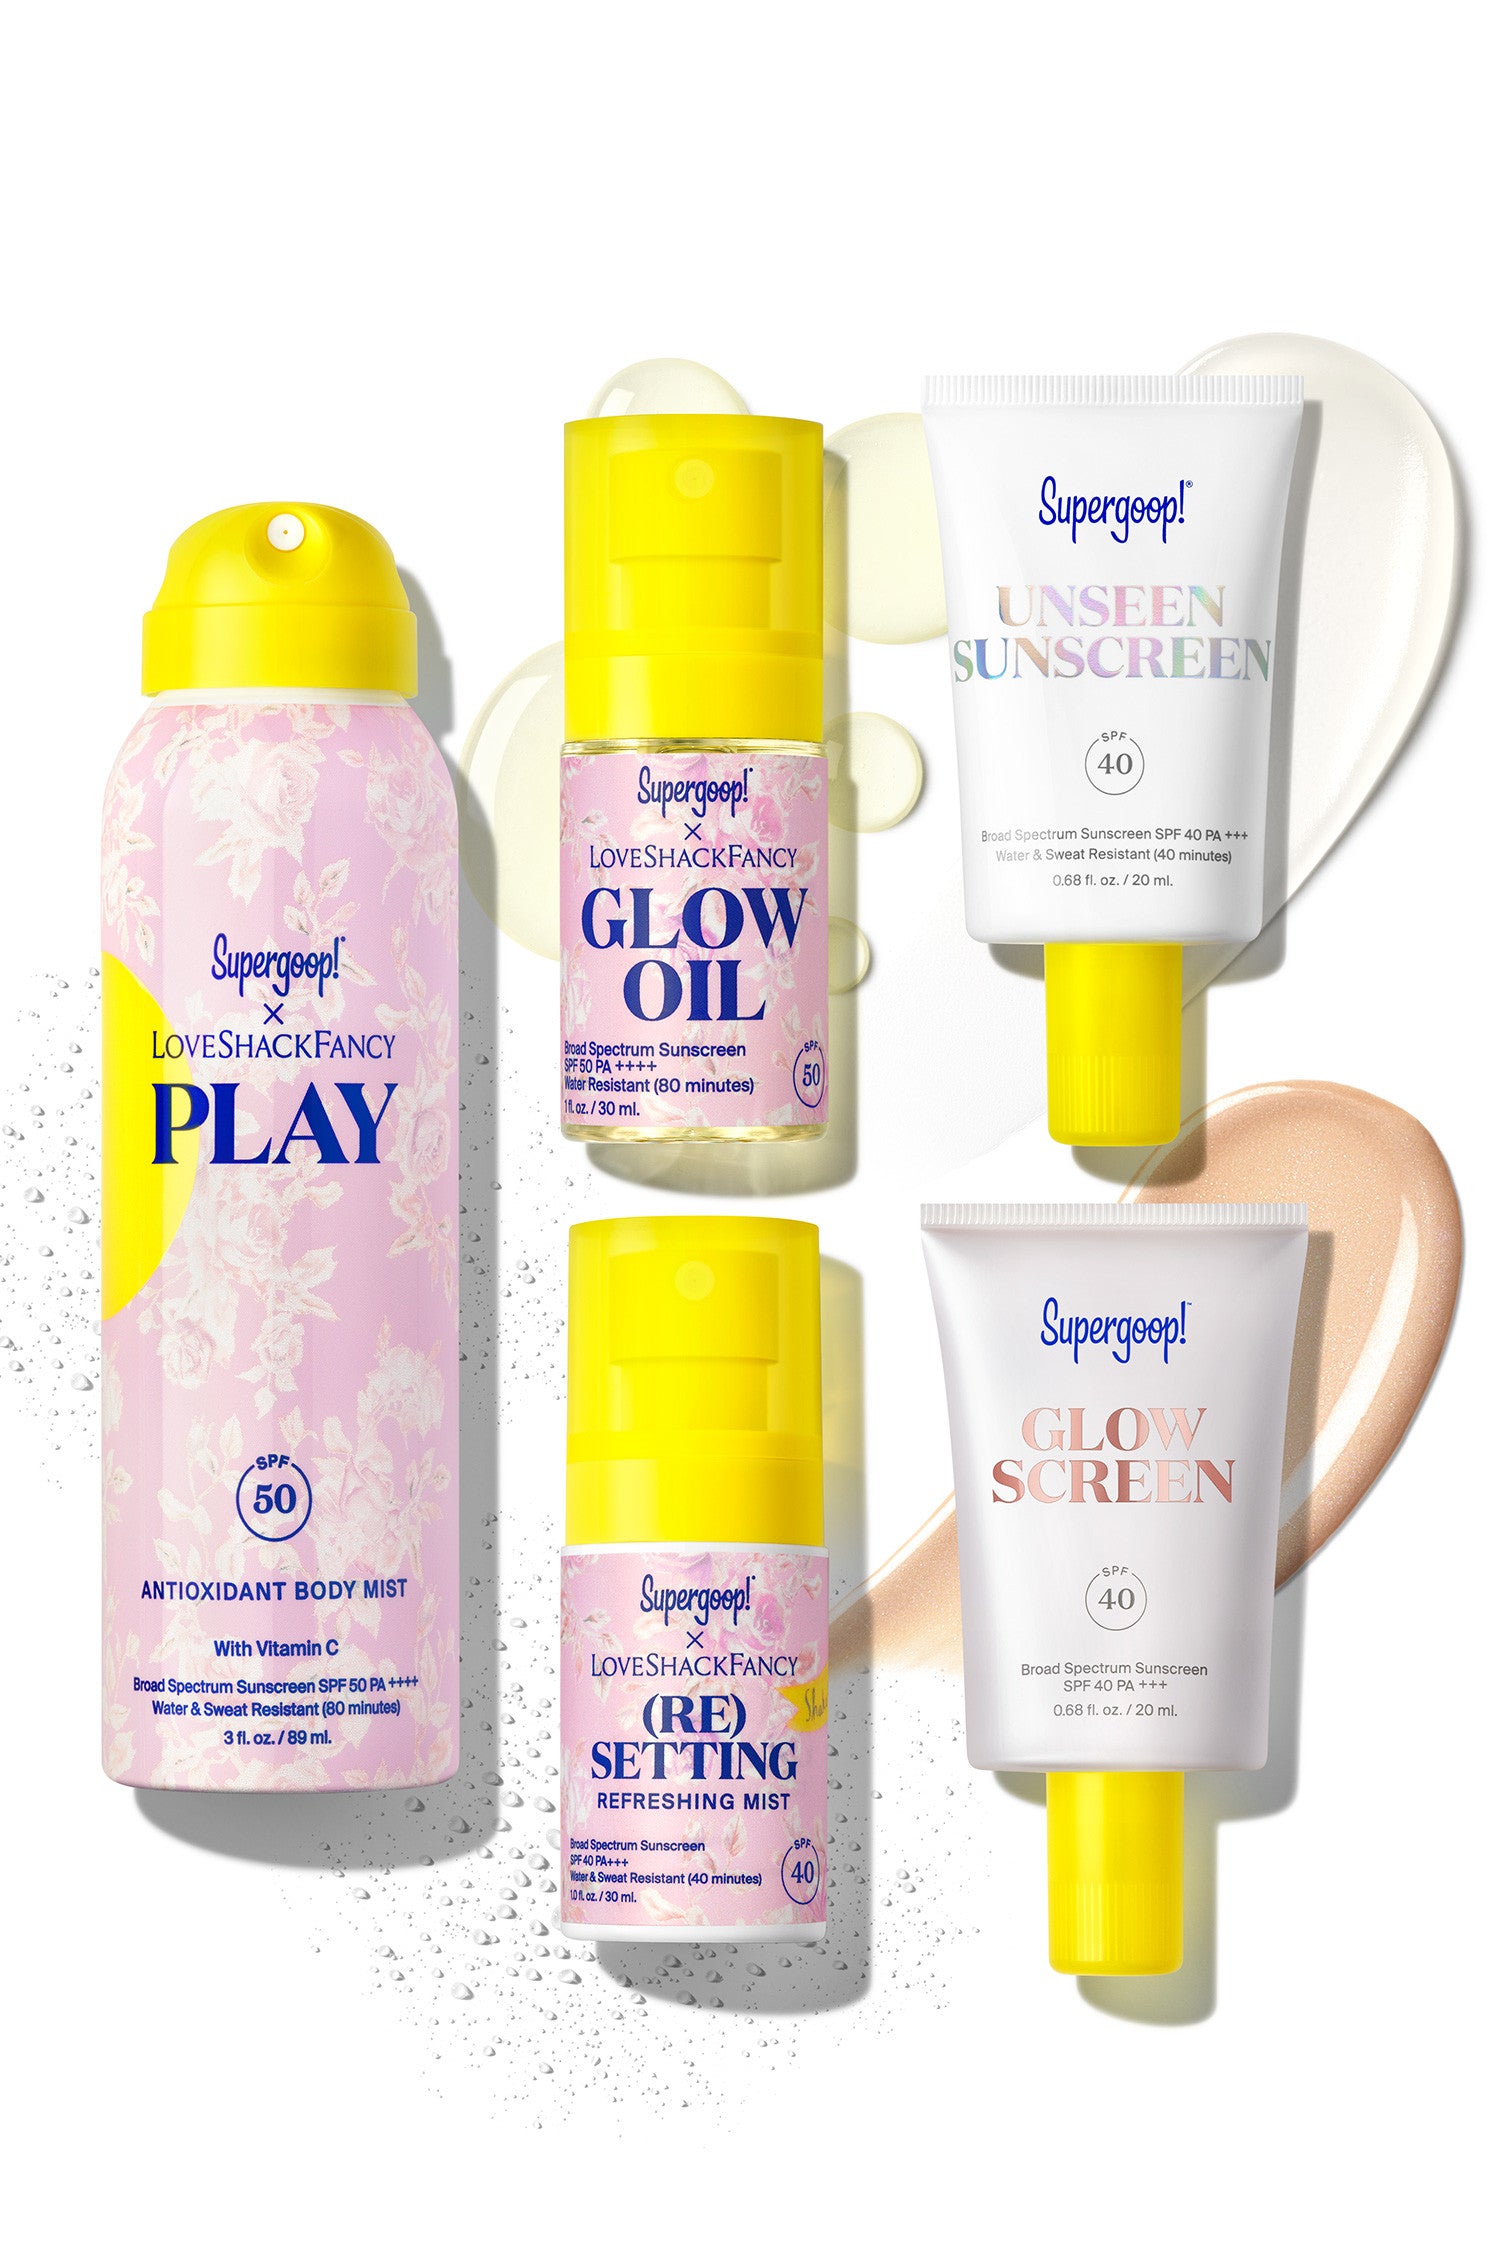 5 Supergoop products in LSF Florals 